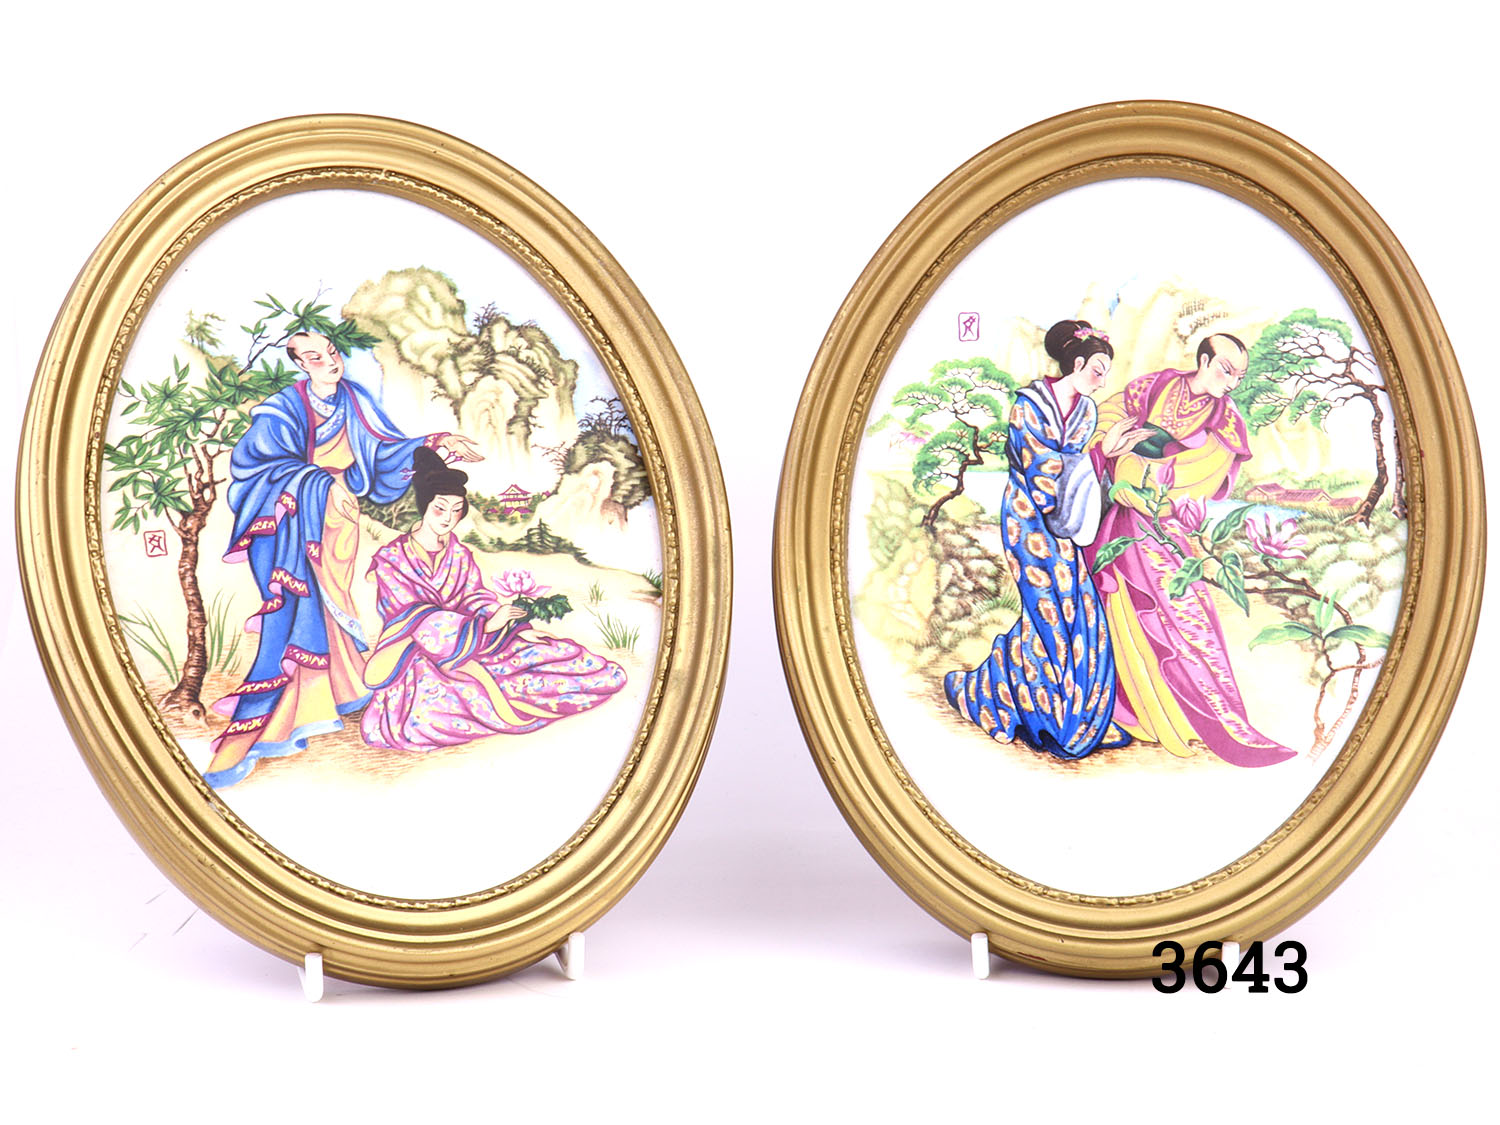 Pair of vintage oval gilt framed Oriental porcelain pictures. Hand-painted with scenes of courting couples in an Oriental setting. Felt peeling at back. Main photo showing both pictures sside by side displayed on stands